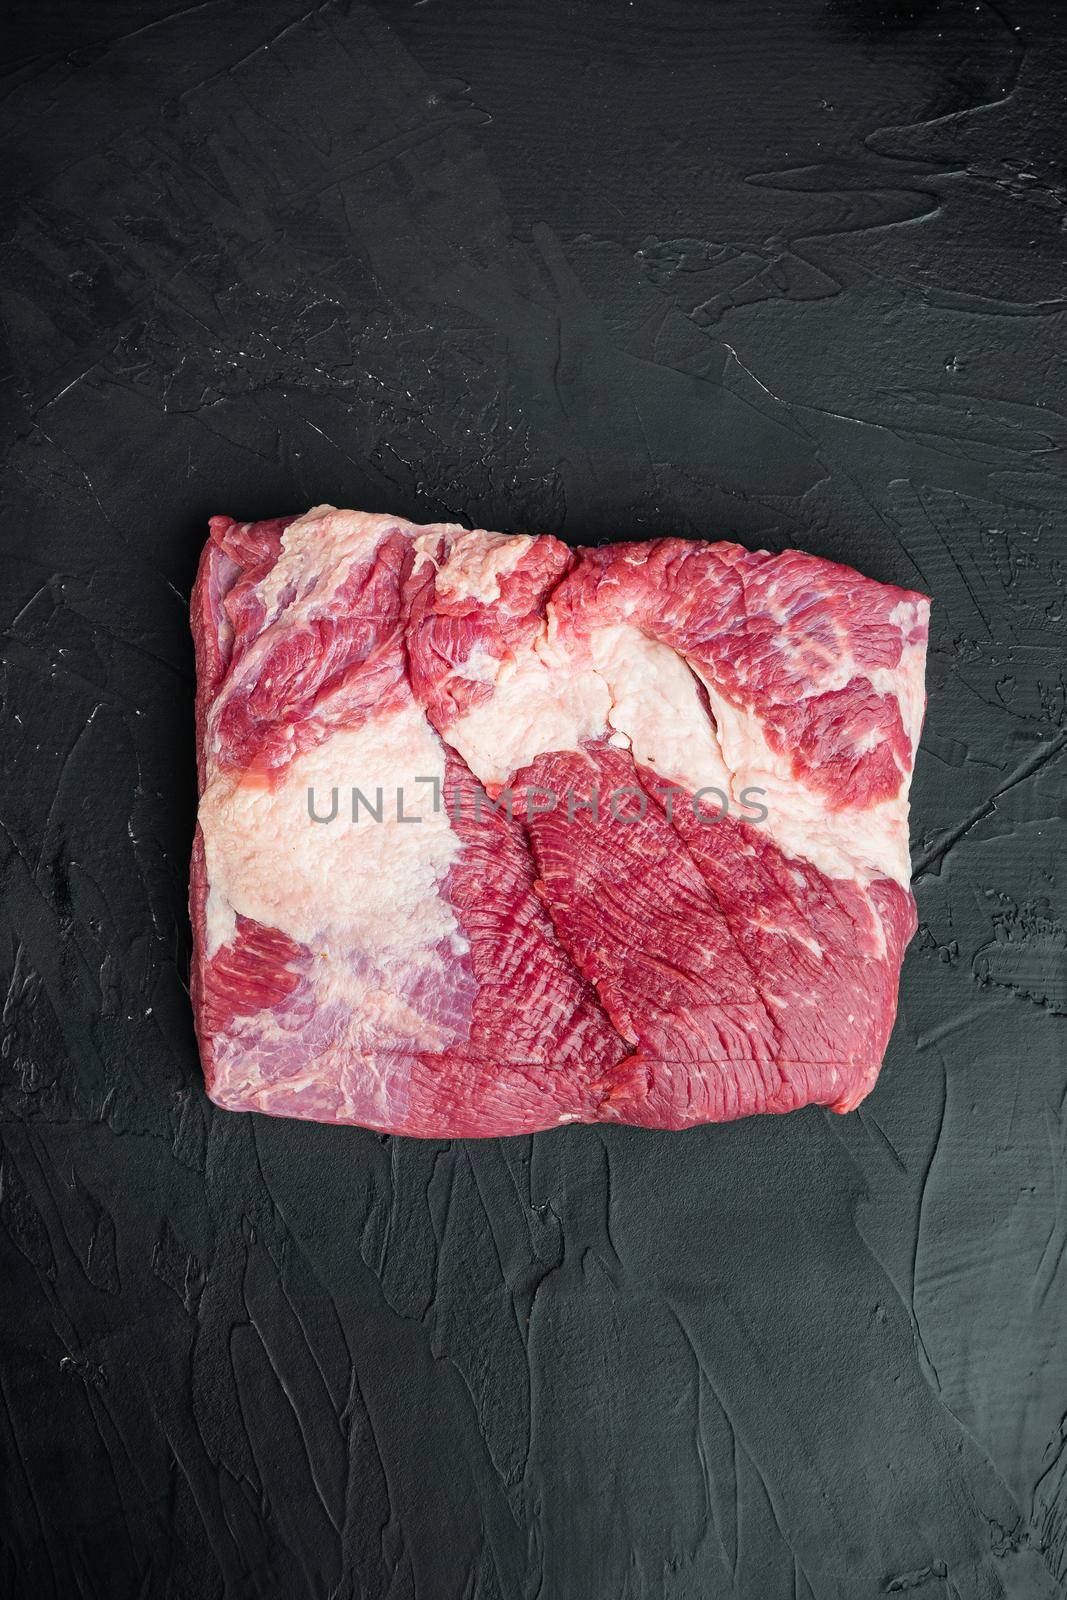 Raw Beef belly, beef brisket meat set, on black stone background, top view flat lay, with copy space for text